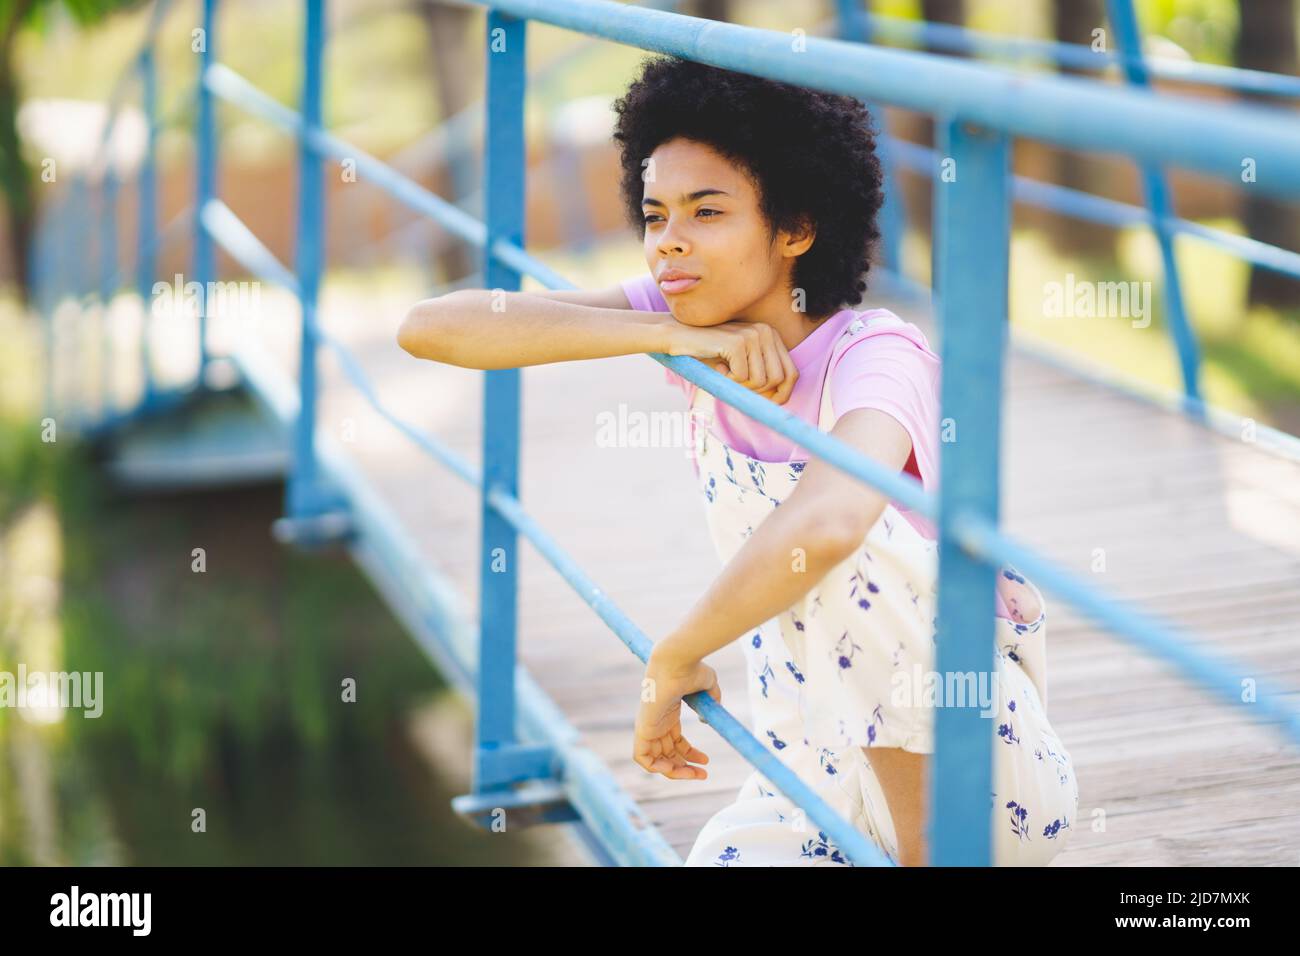 African American girl lost in thought, feeling lonely and depressed, Stock Photo